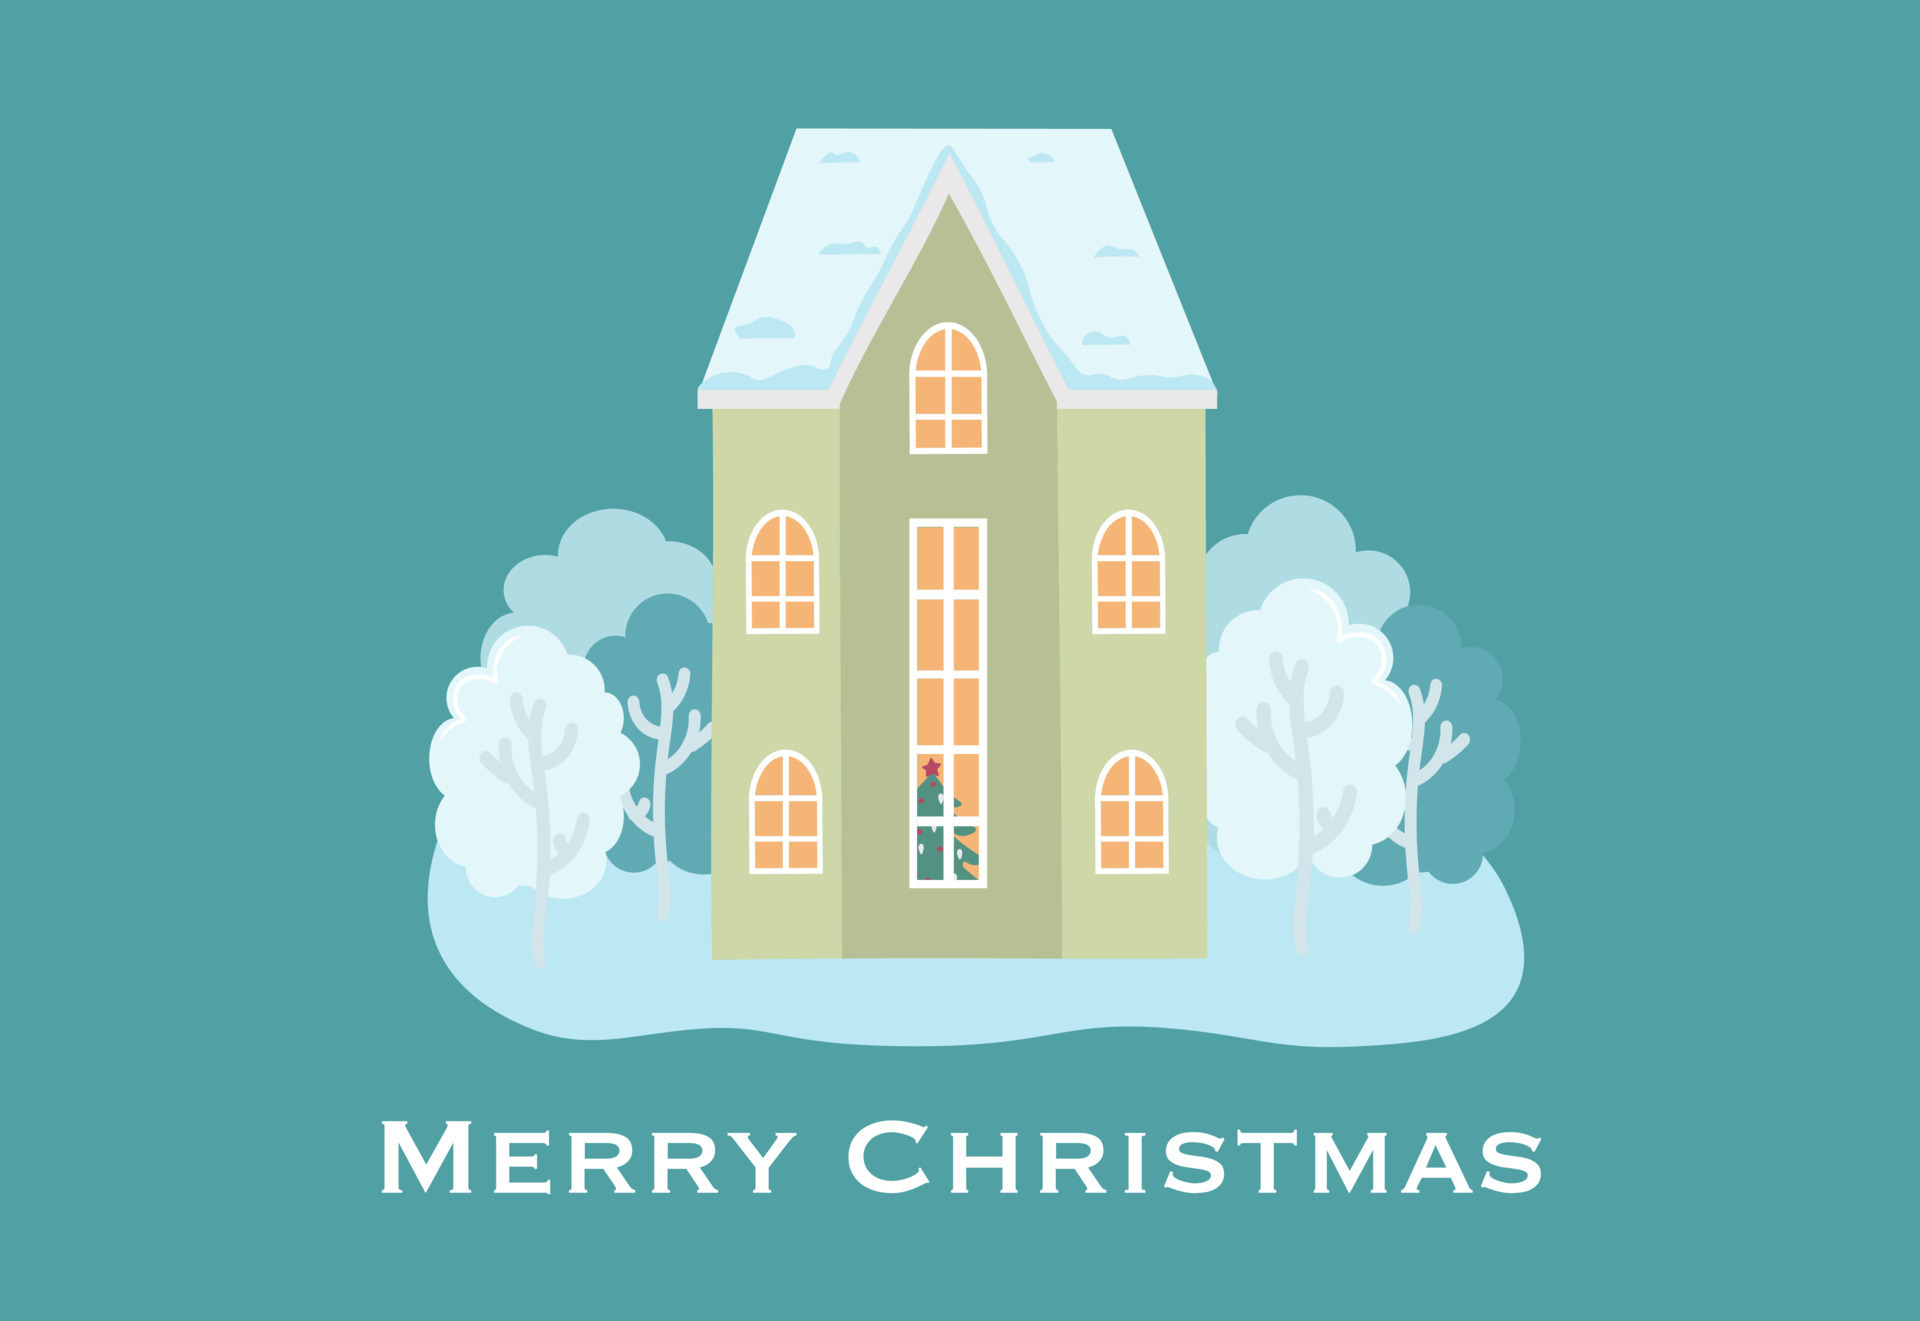 House in the snow. Christmas card background poster. Vector ...